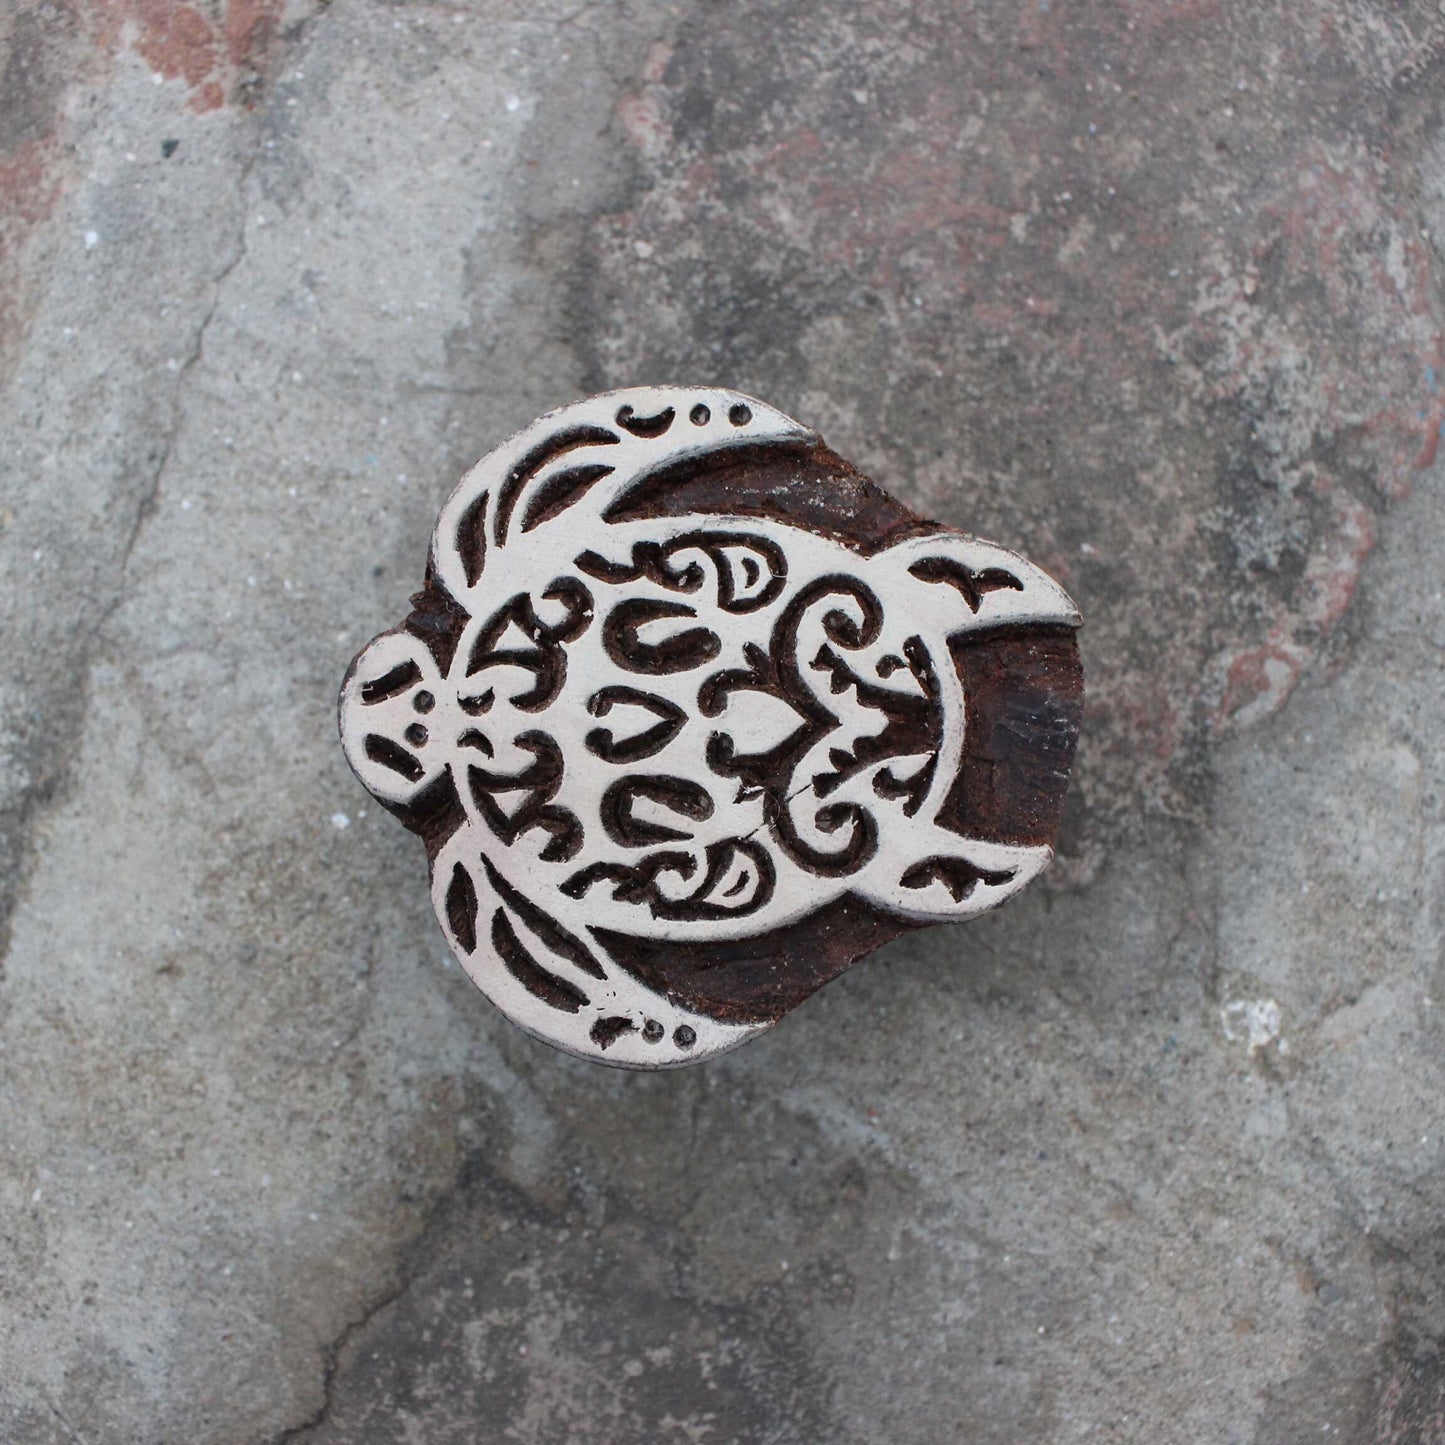 Tortoise Block Print Stamp Indian Wooden Stamp Indian Block Print Stamp Hippie Fabric Block Print Stamp For Printing Good Luck Soap Stamp